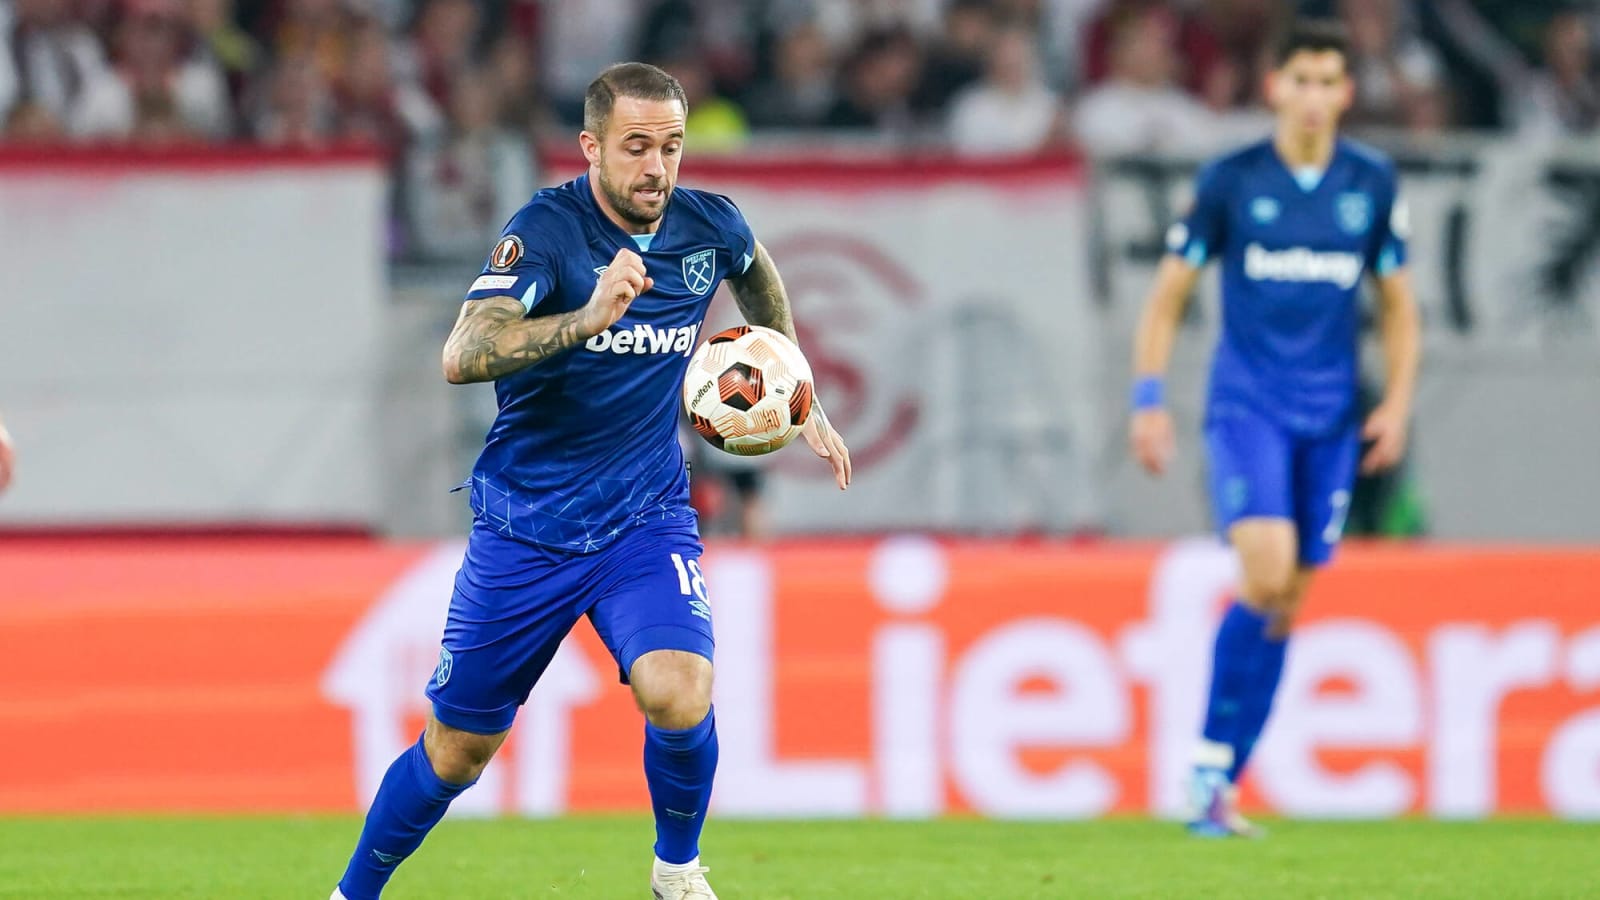 West Ham eye loan move for £200k-a-week Premier League flop as Ings replacement